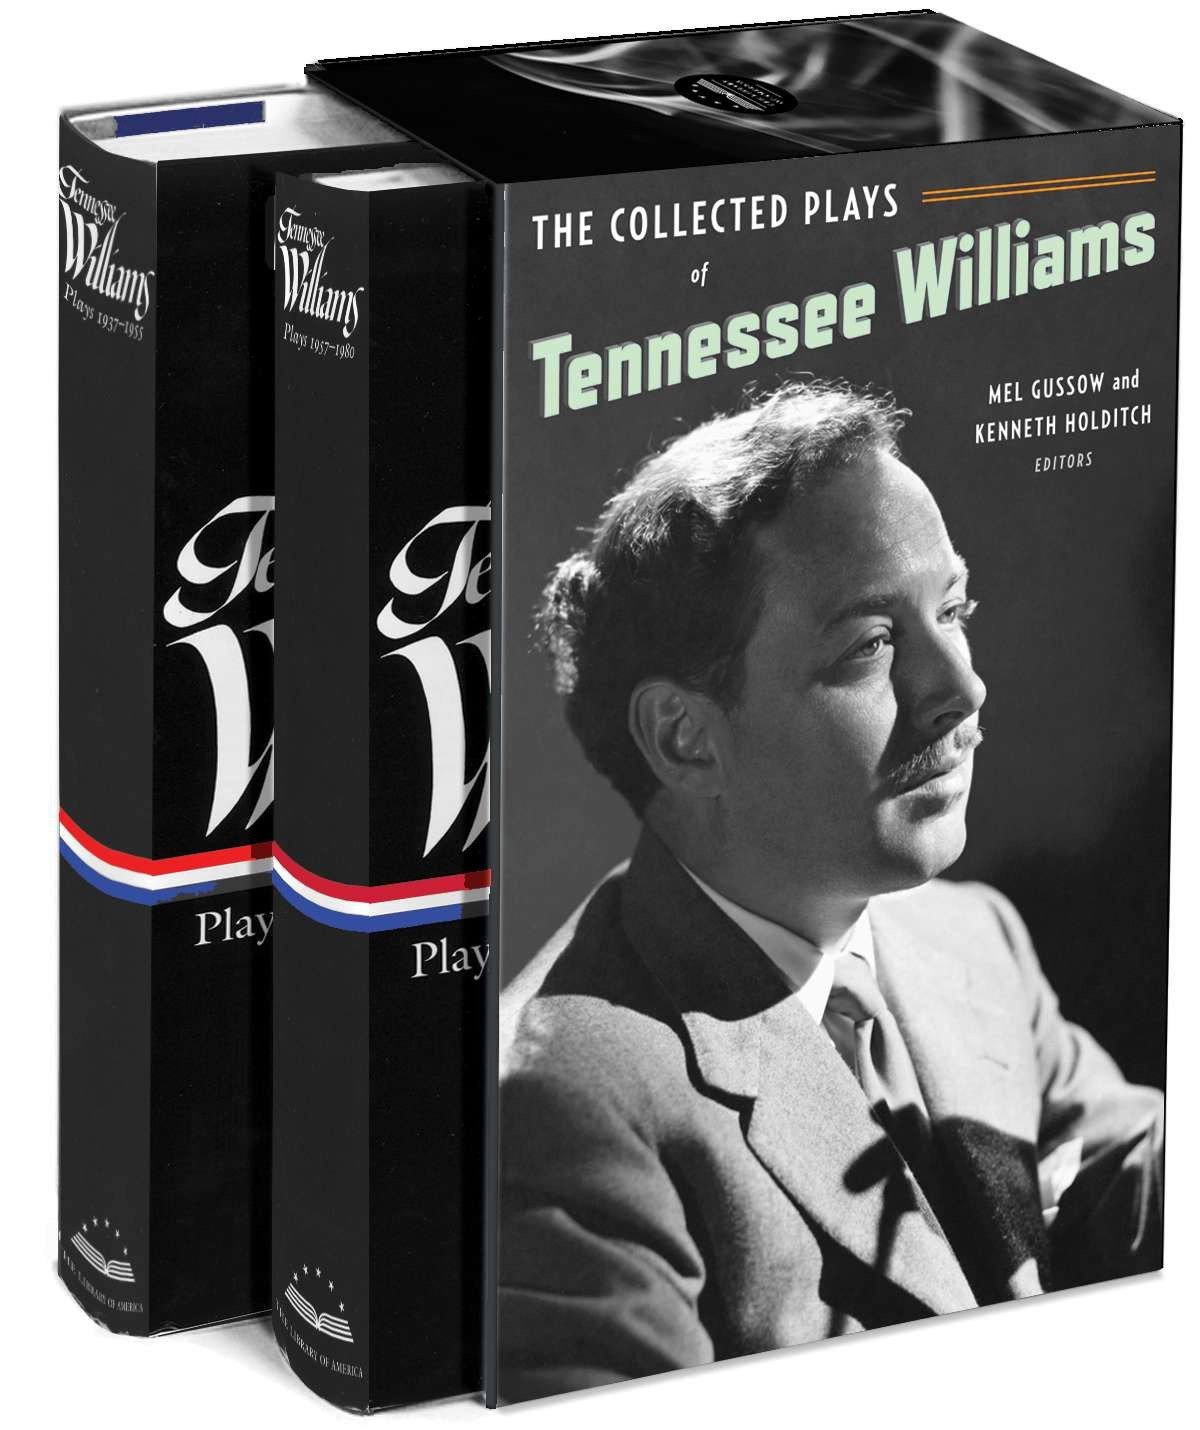 The Collected Plays of Tennessee Williams: A Library of America Boxed Set (The Library of America)